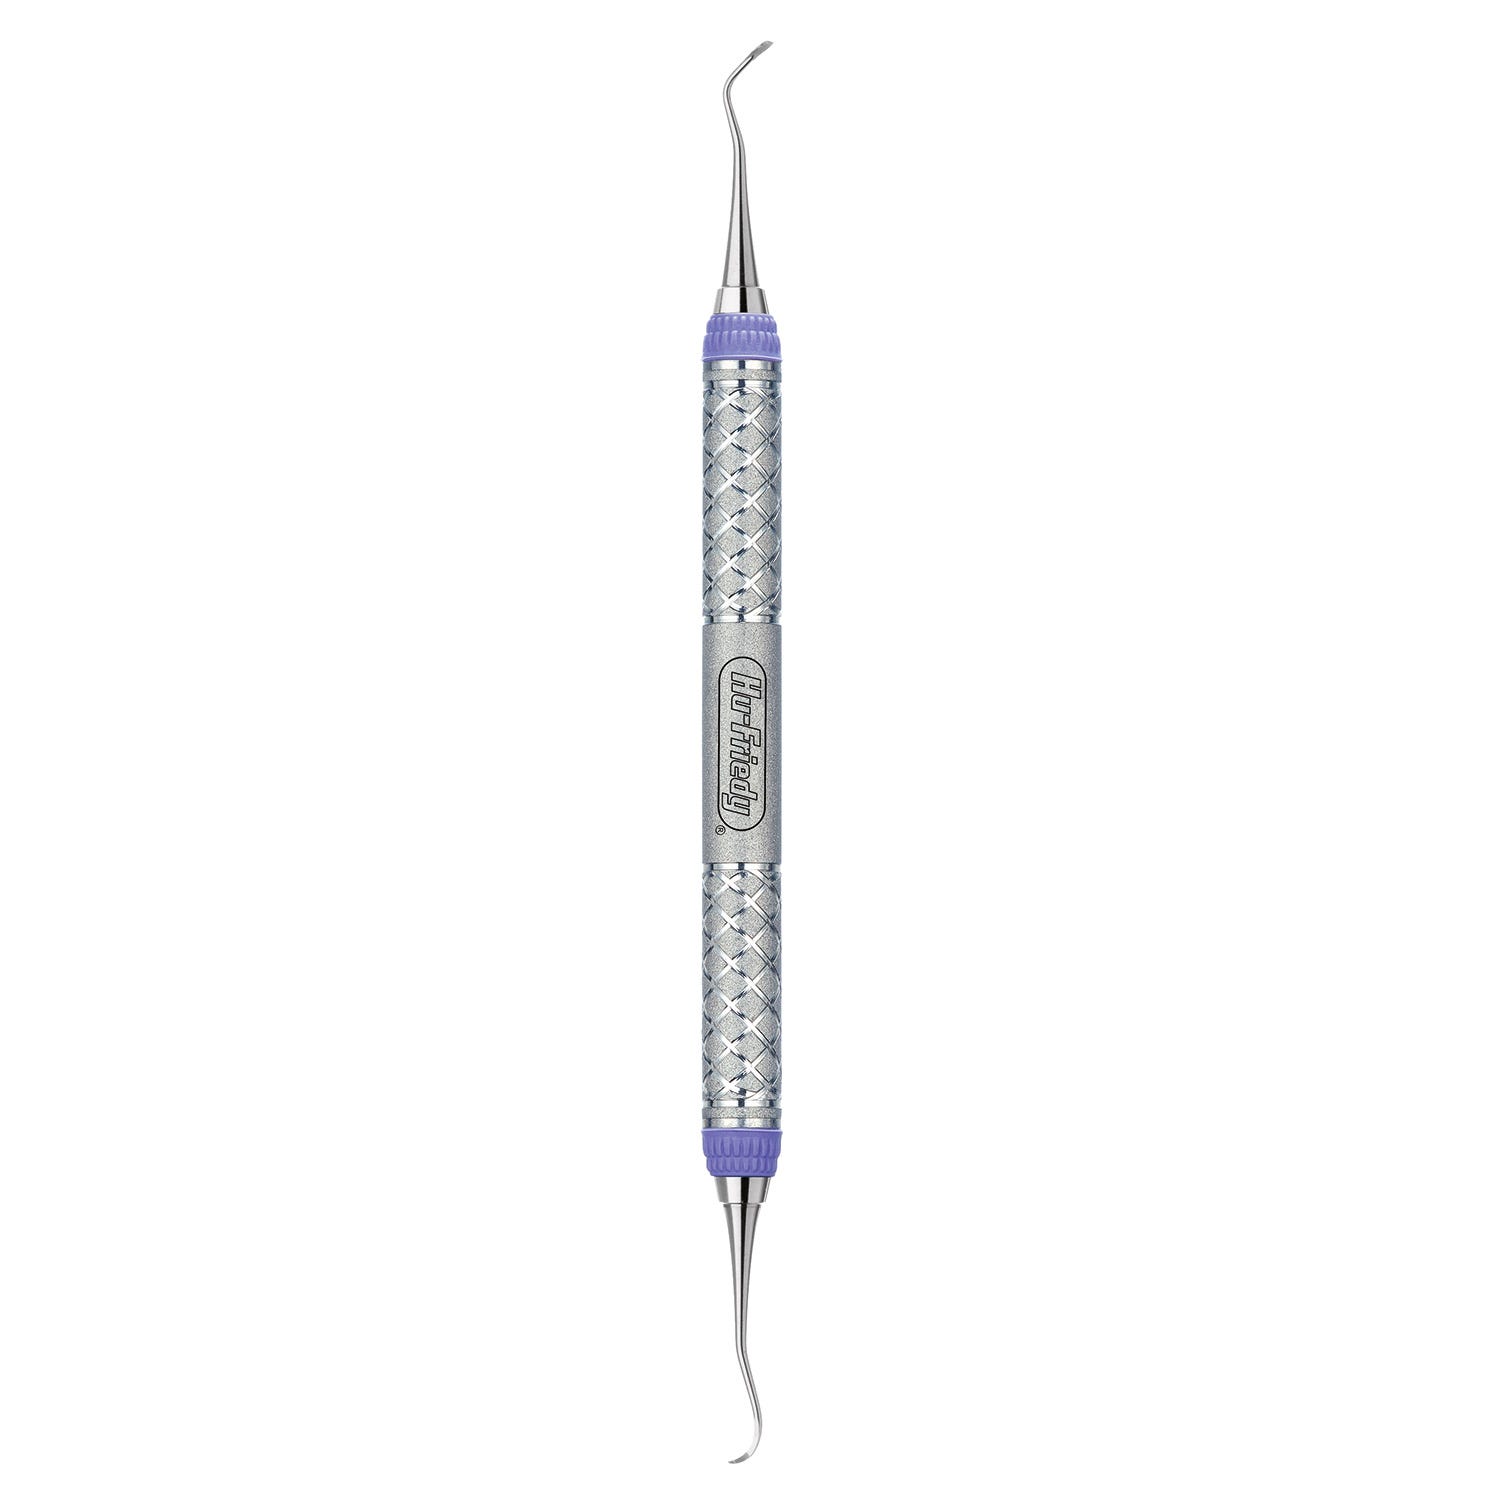 Scaler Nevi #1 Anterior Everedge 2.0, #9 Handle Double-Ended